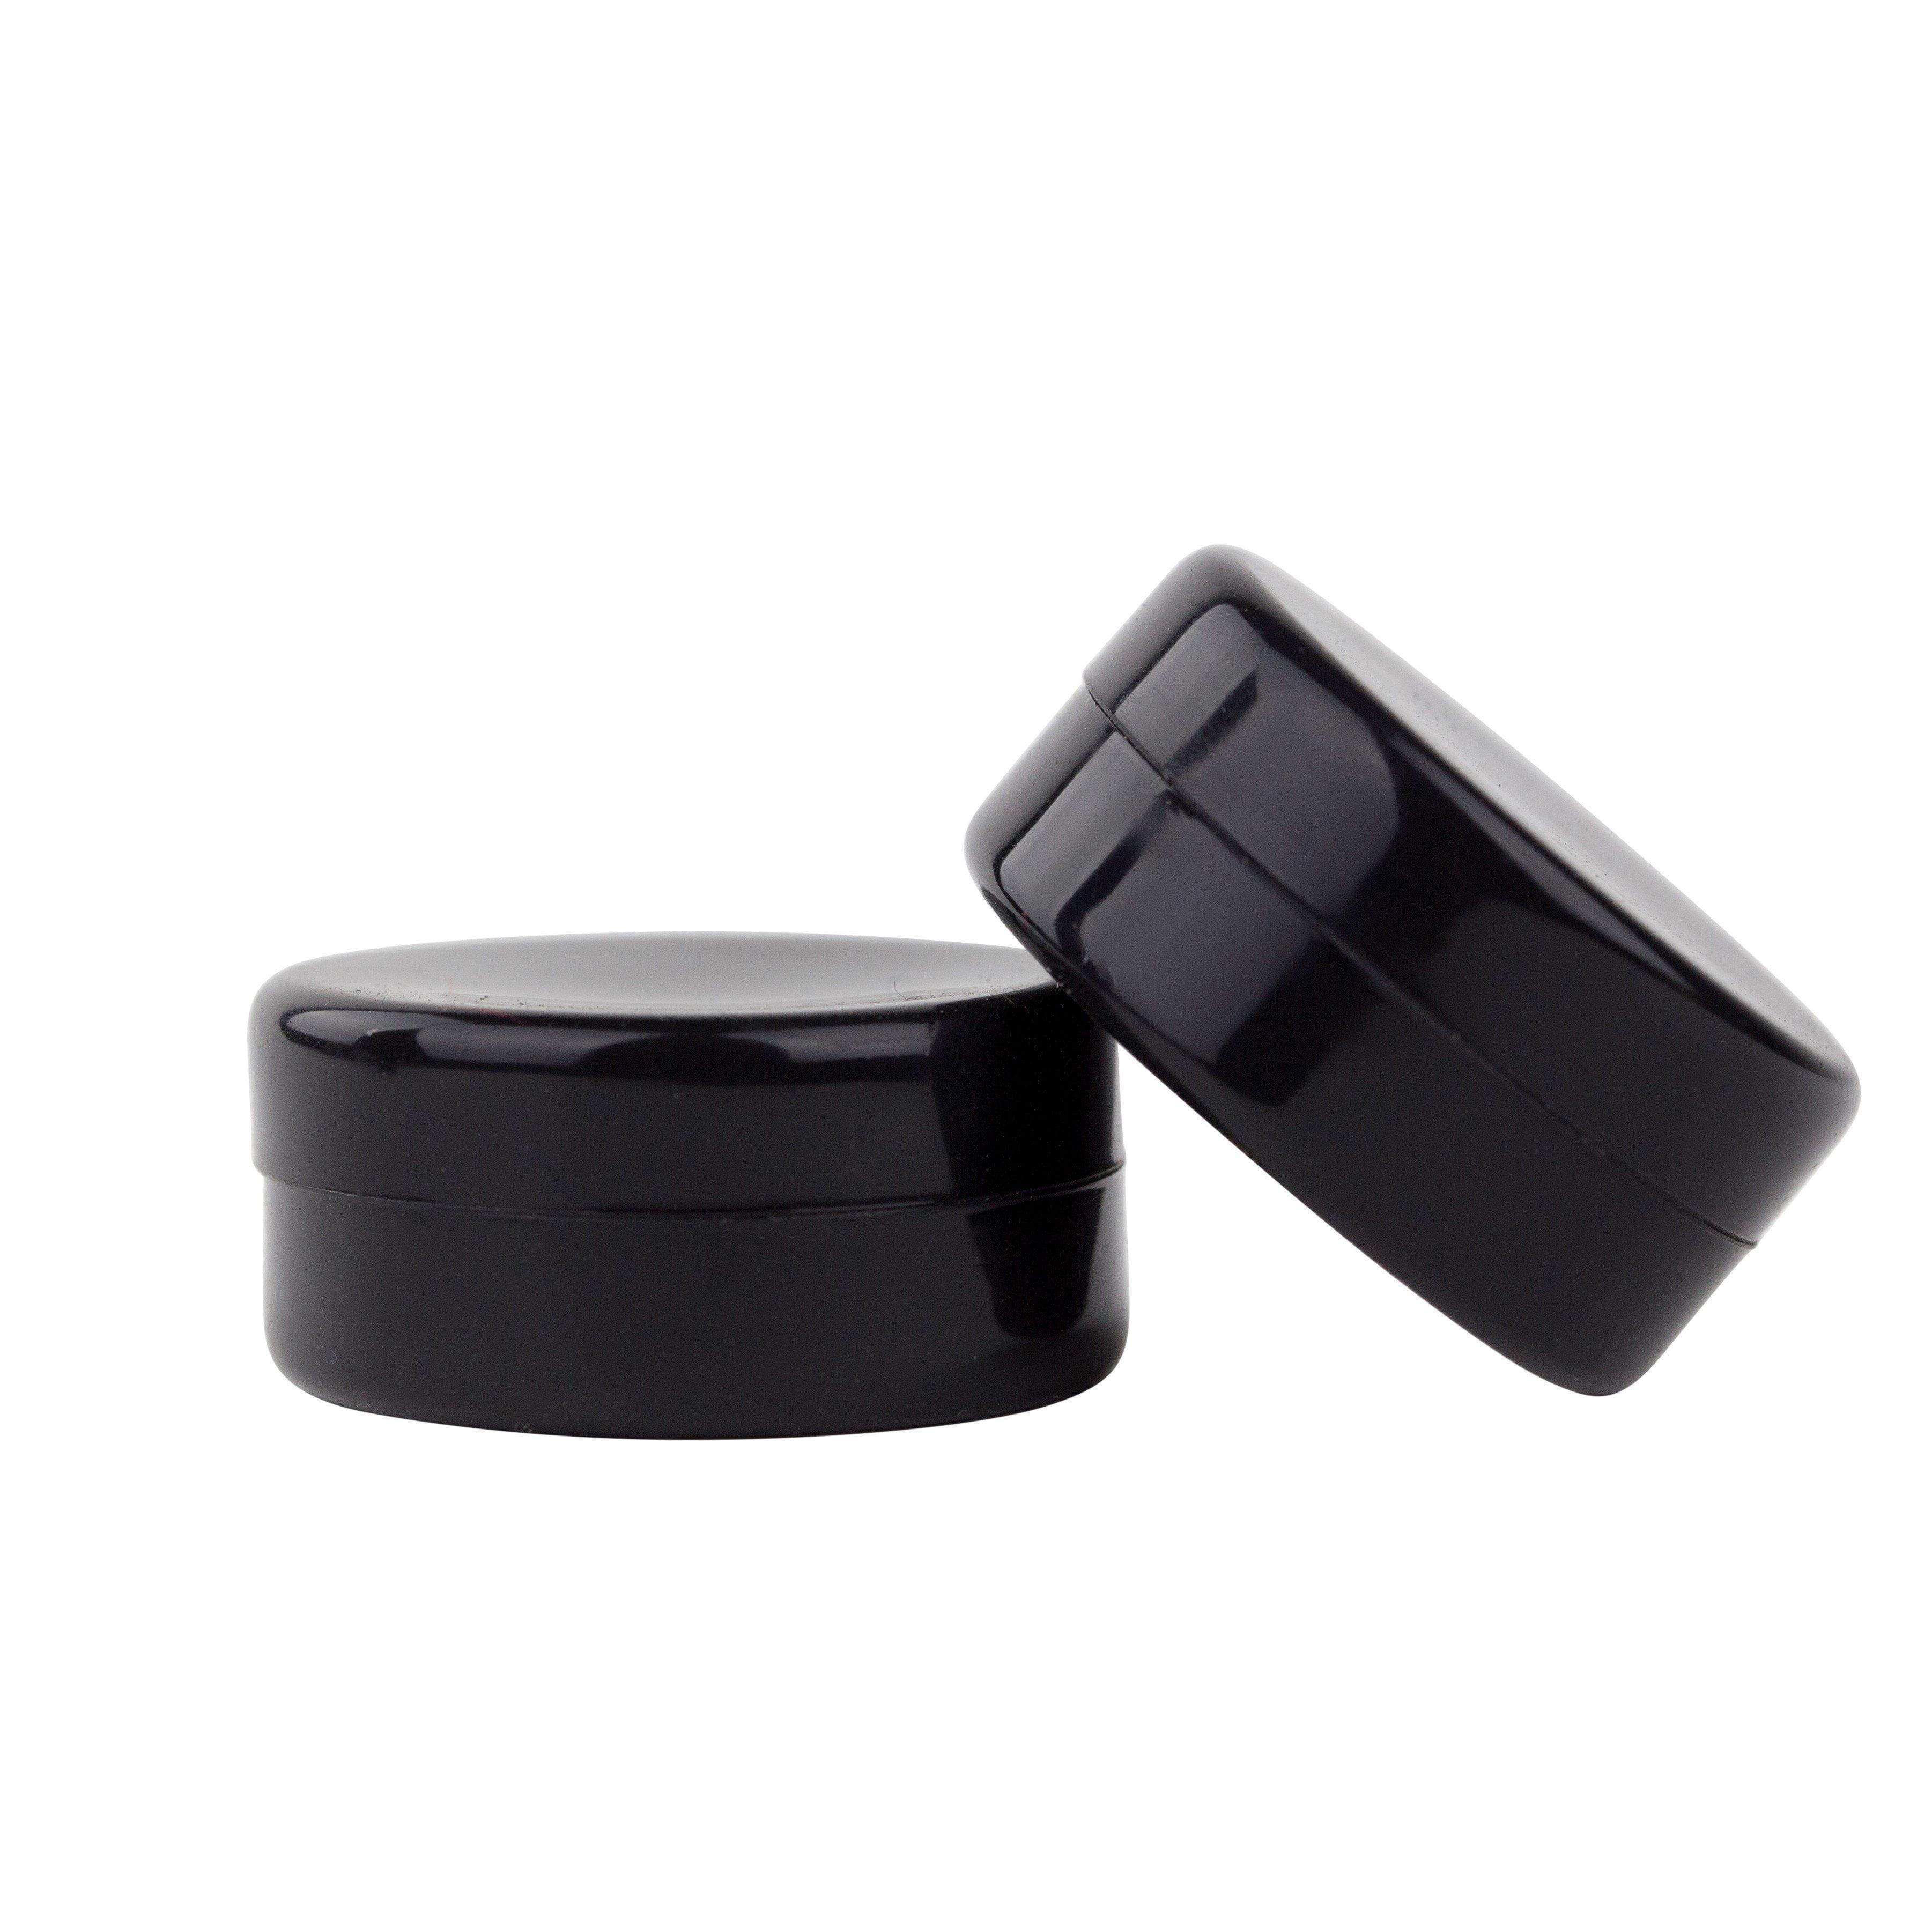 Black Silicone Wax Container - 2 Pack - Everything 420